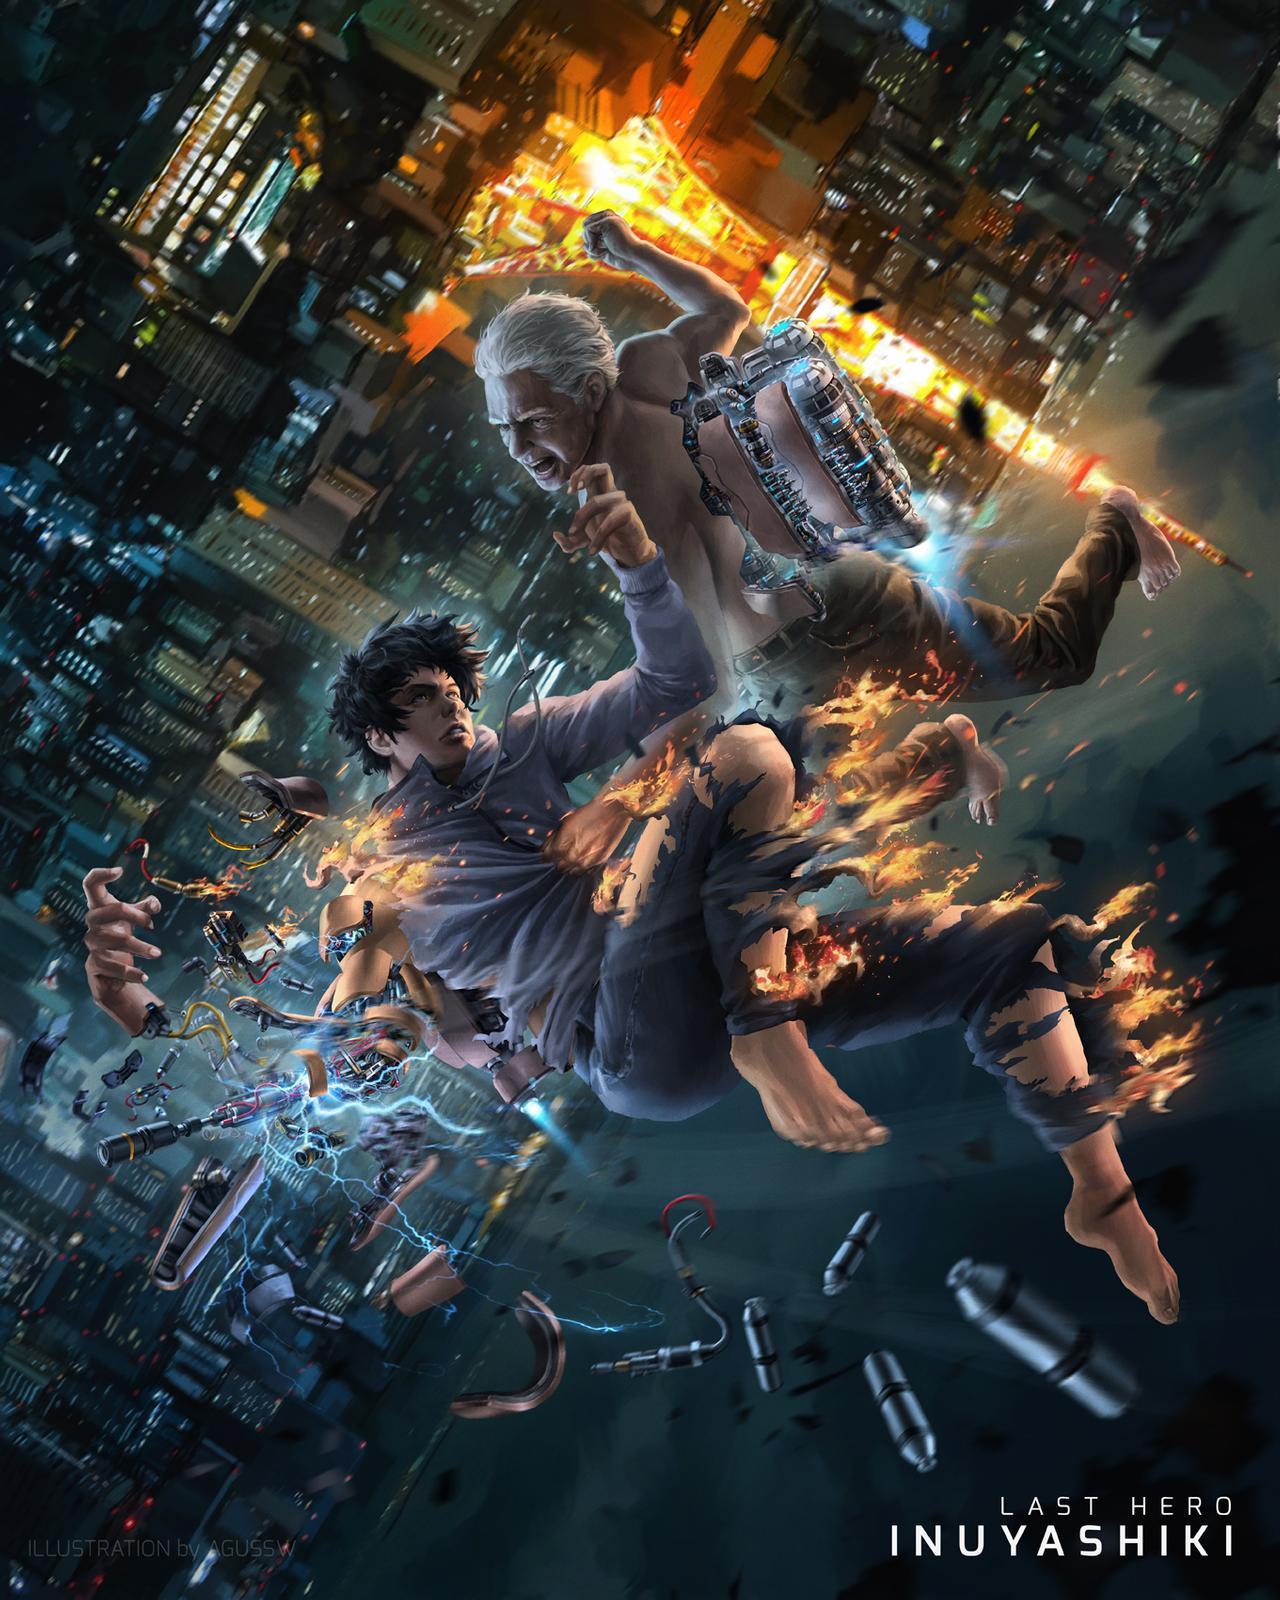 last_hero_inuyashiki_by_agussw_dc2l4my-fullview.jpg